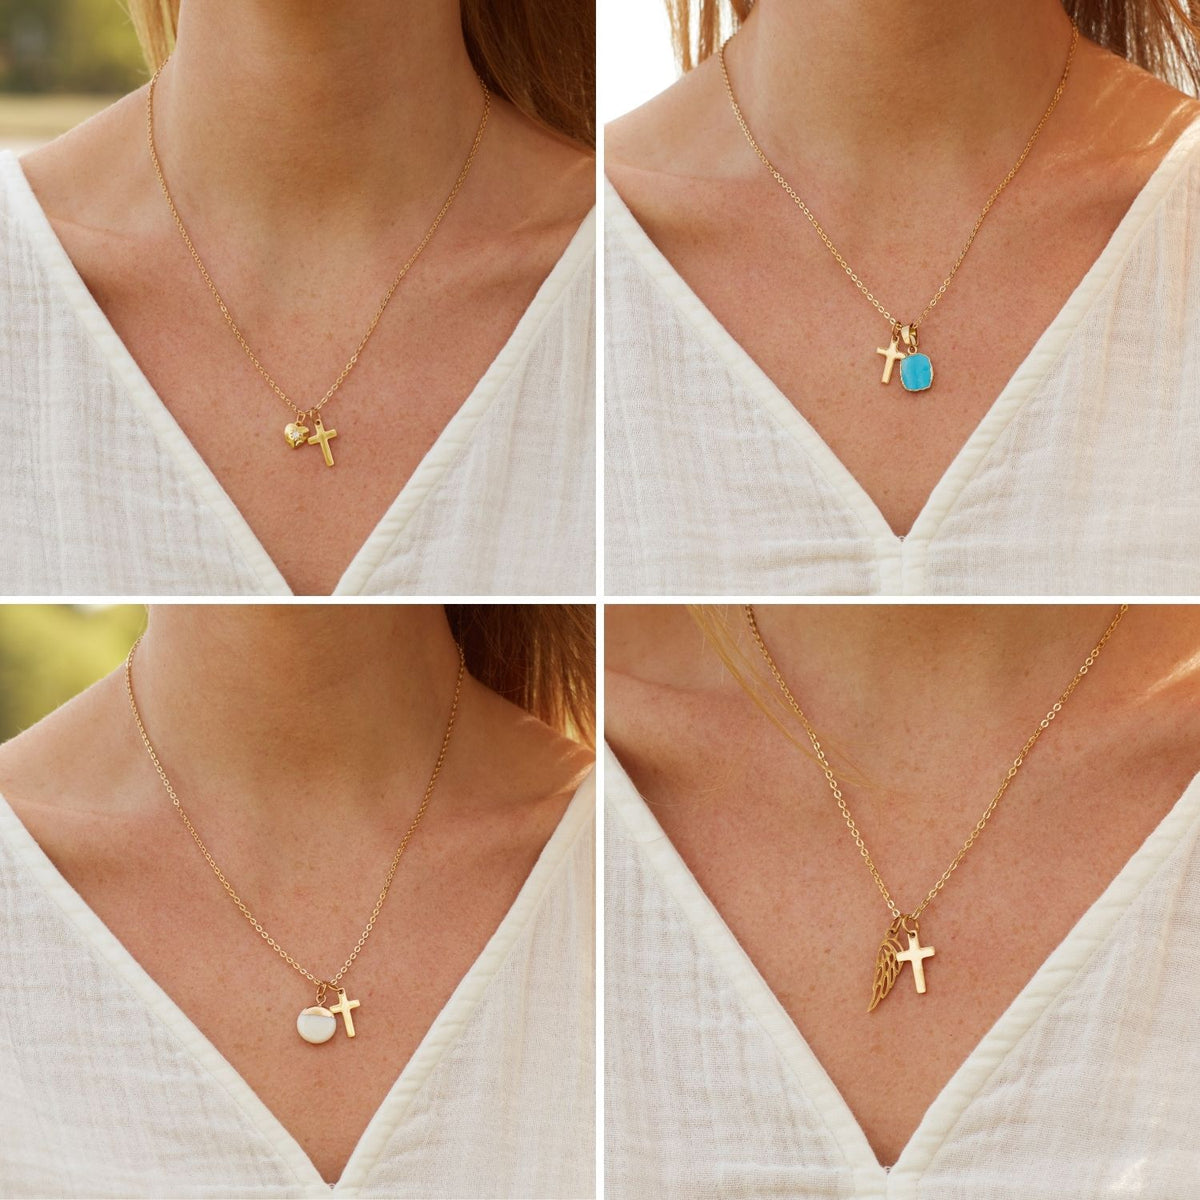 Only an Aunt | Keep Secrets Like a Sister | Cross Necklace